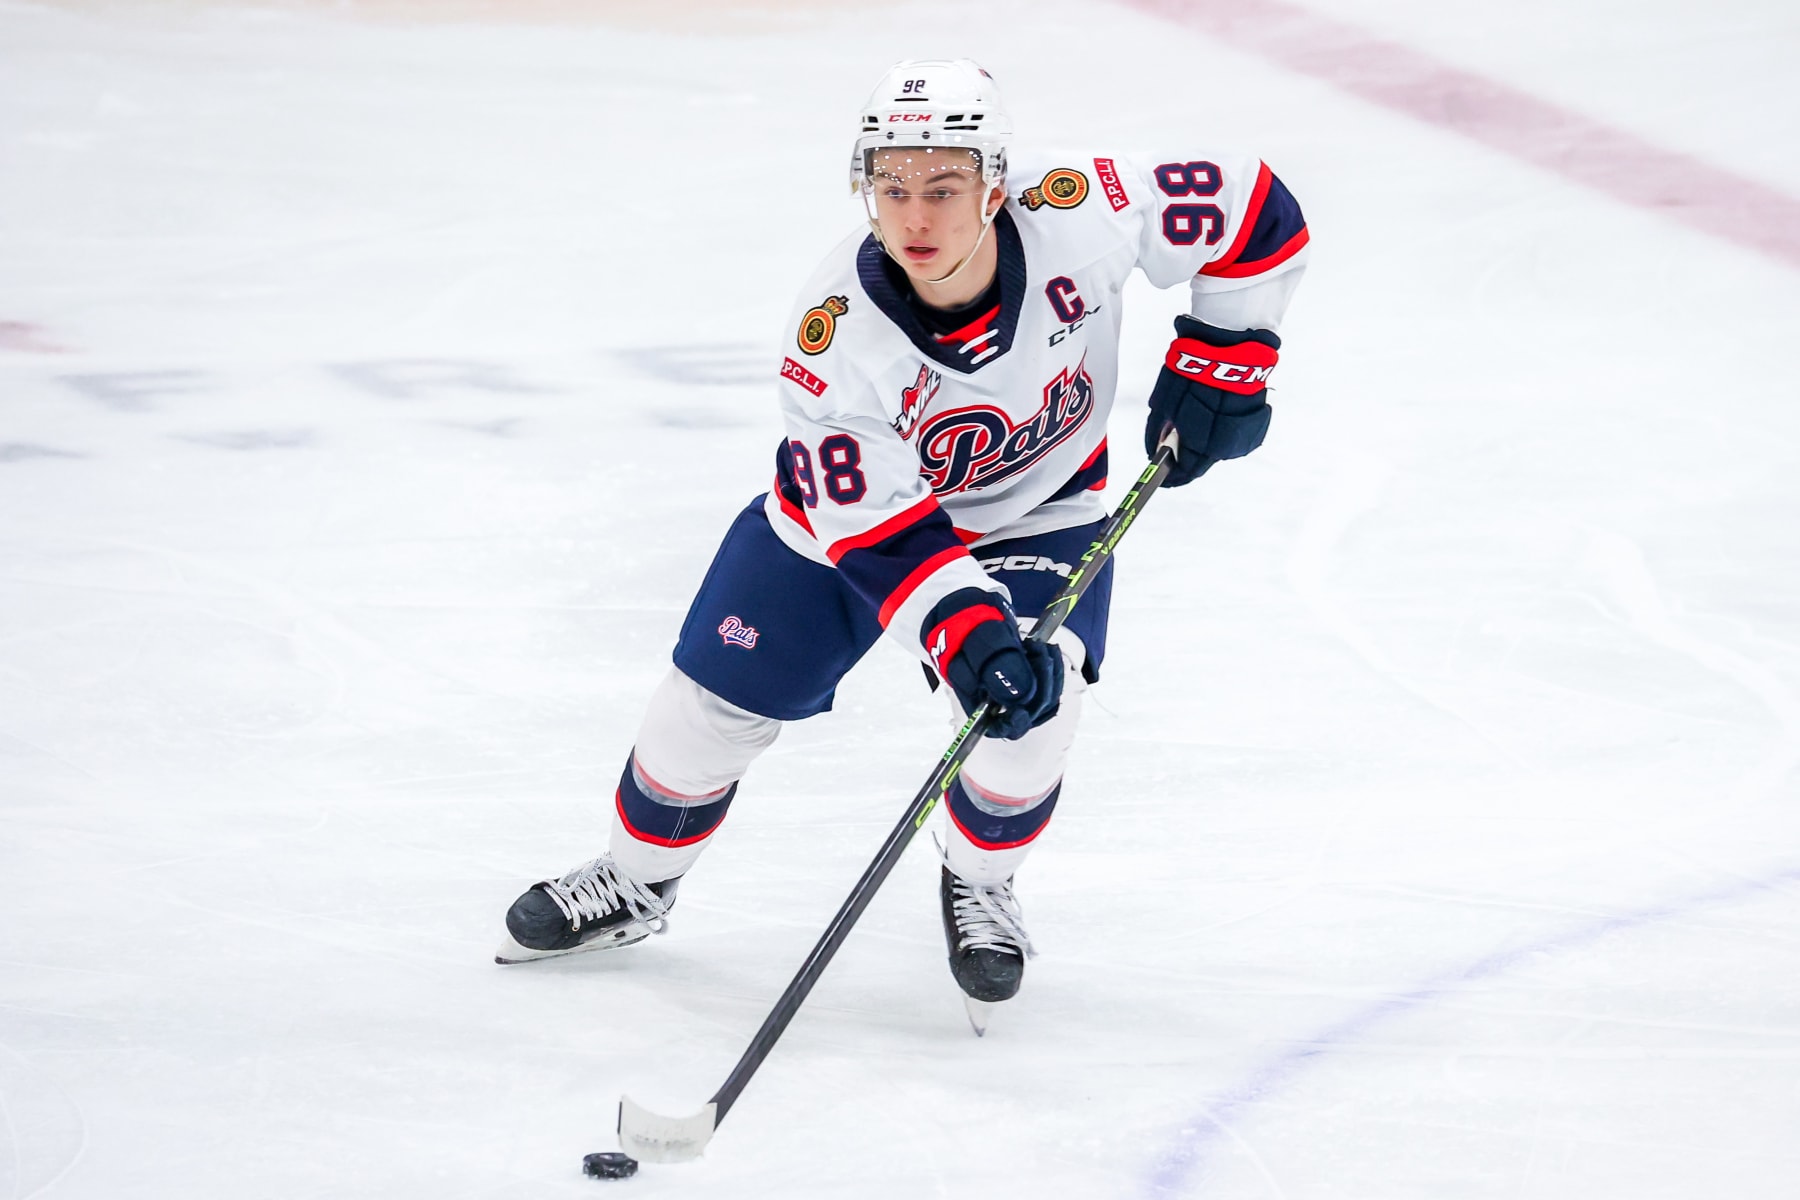 Philadelphia Flyers select Matvei Michkov seventh overall after rumors  suggest Capitals were pursuing him